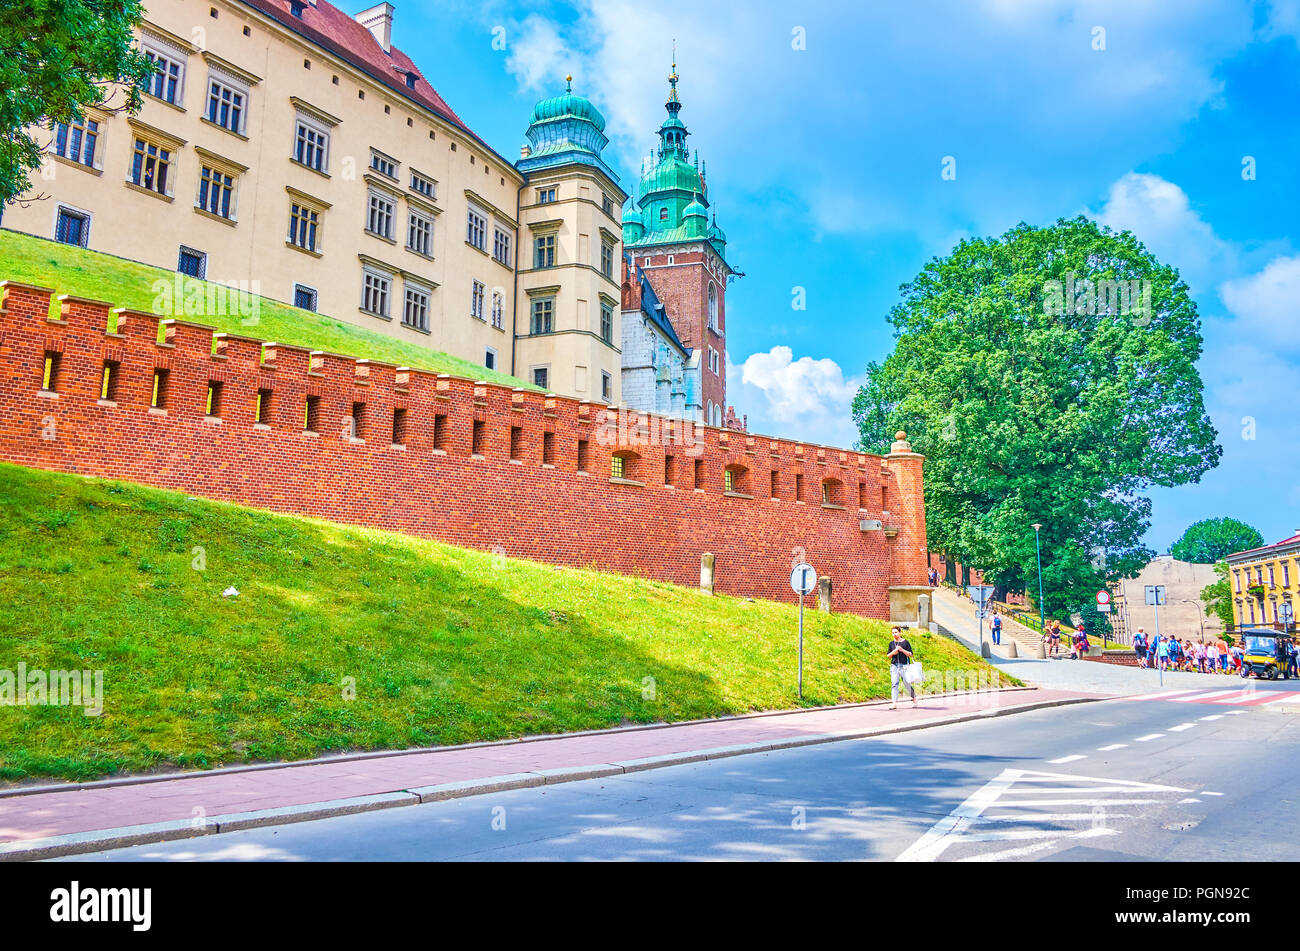 KRAKOW, POLAND - JUNE 11, 2018: The view on beautiful Wawel Castle with its rampart and main staircases inside, on June 11 in Krakow. Stock Photo